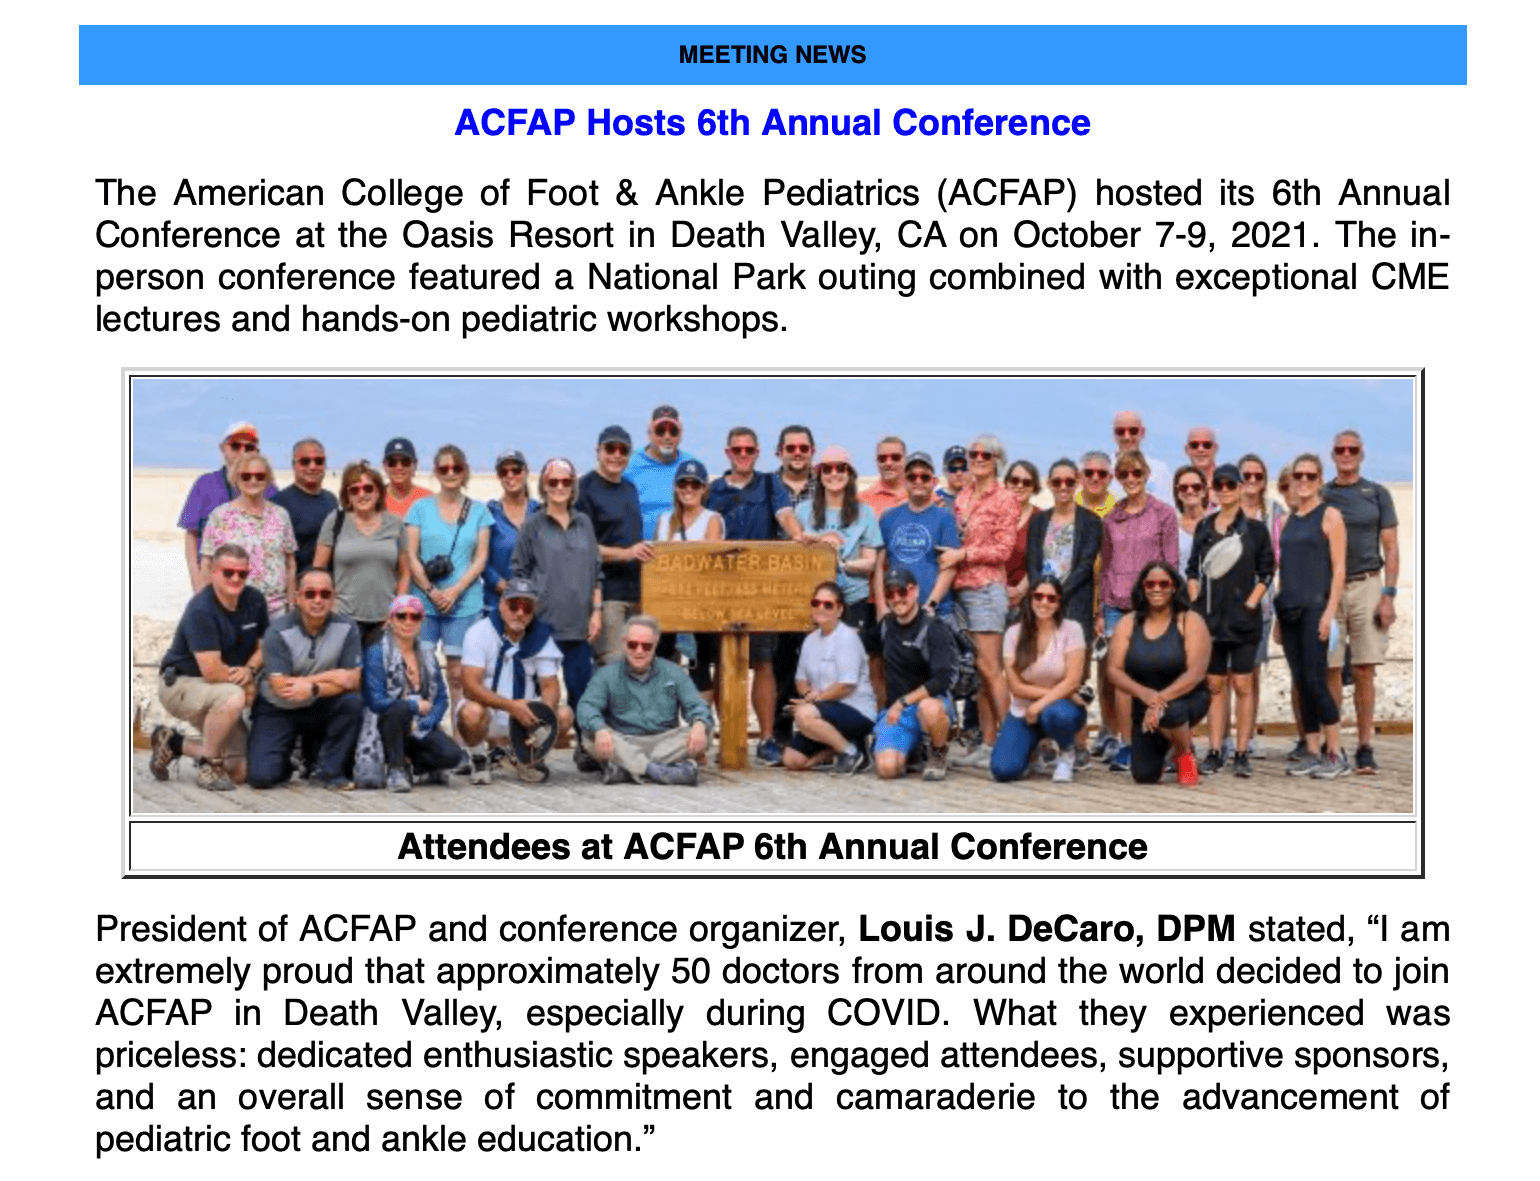 ACFAP Holds 2021 Annual Conference